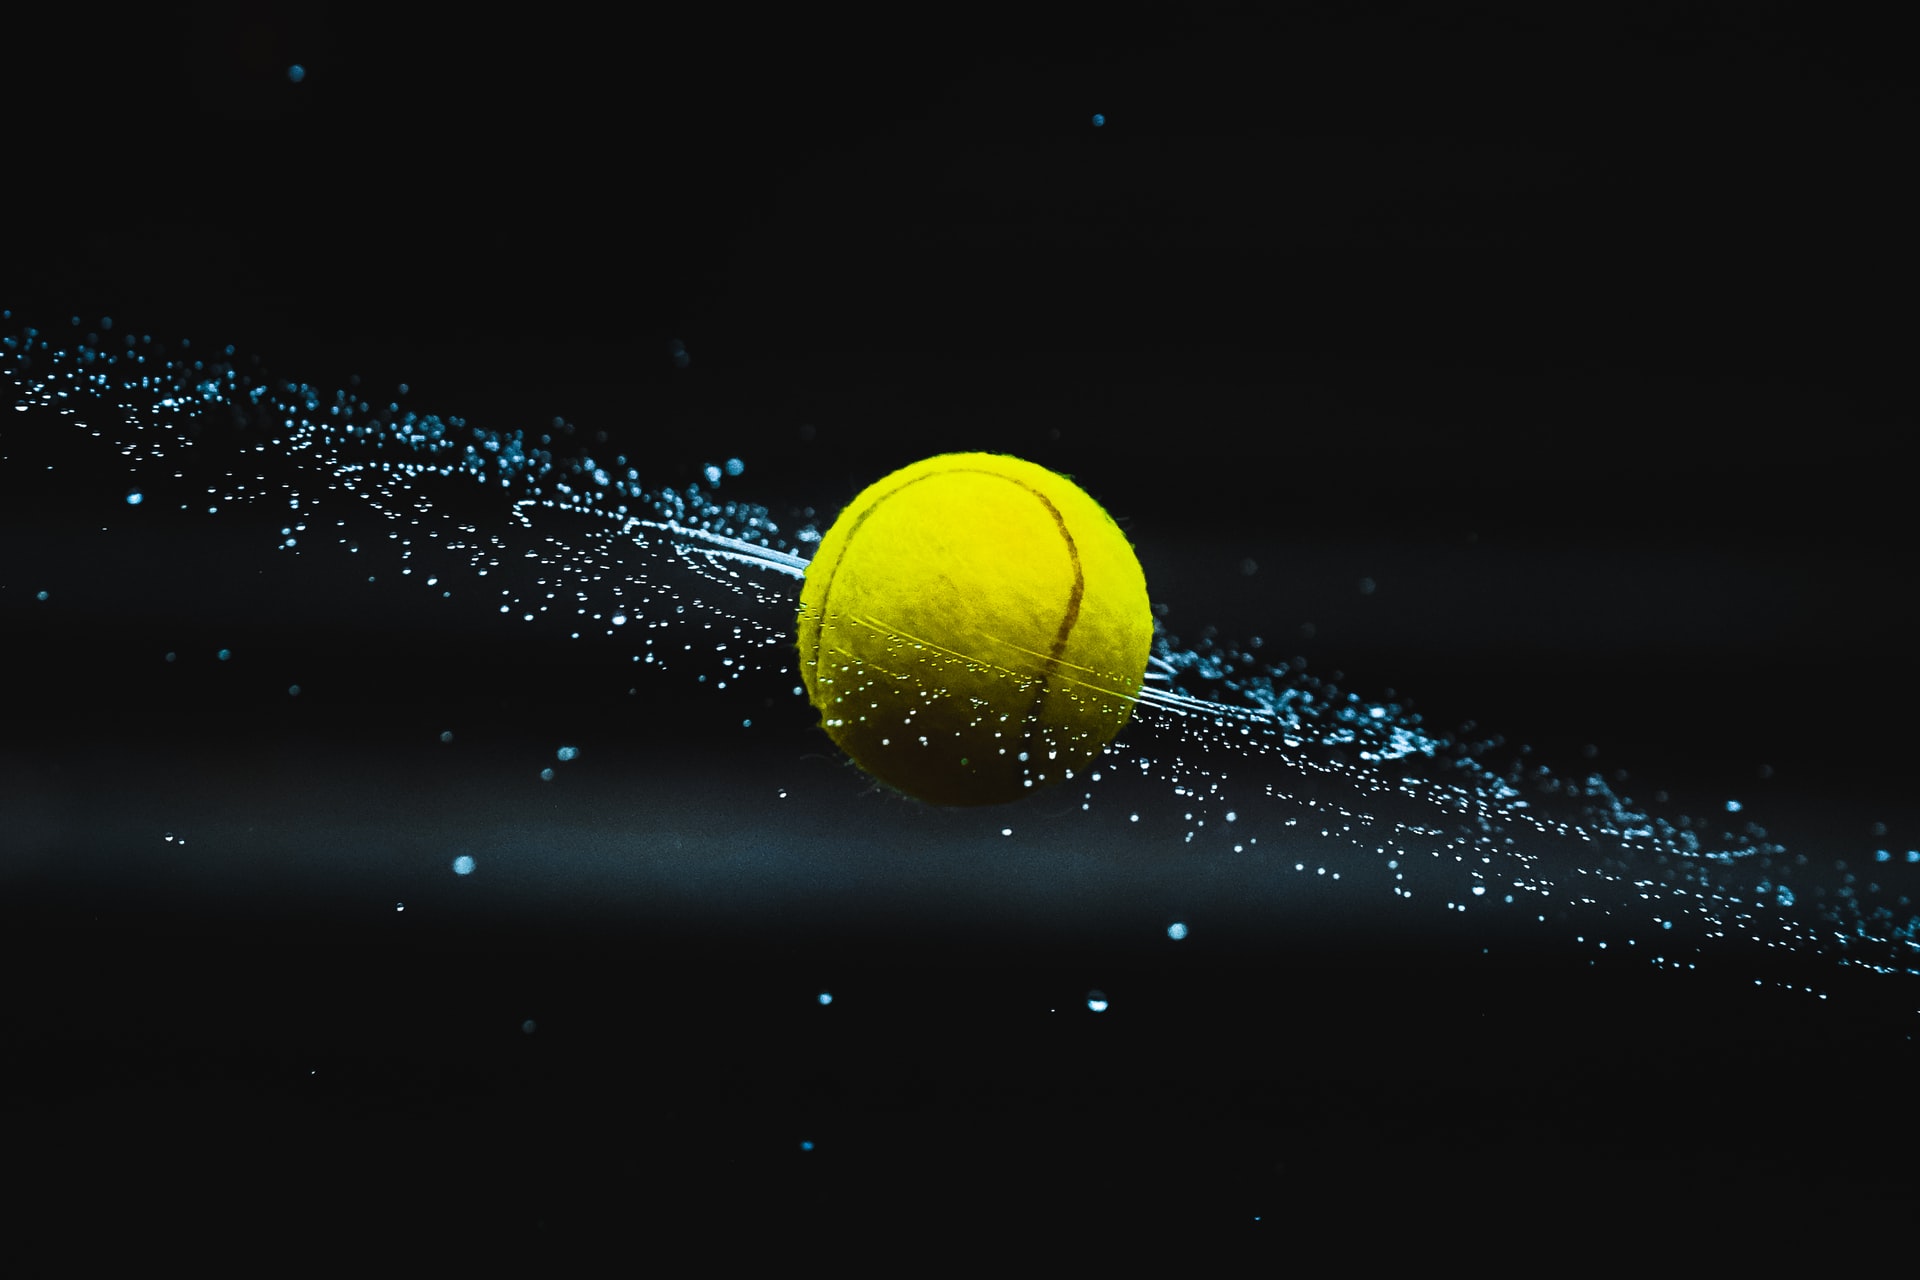 Green and yellow tennis ball on water